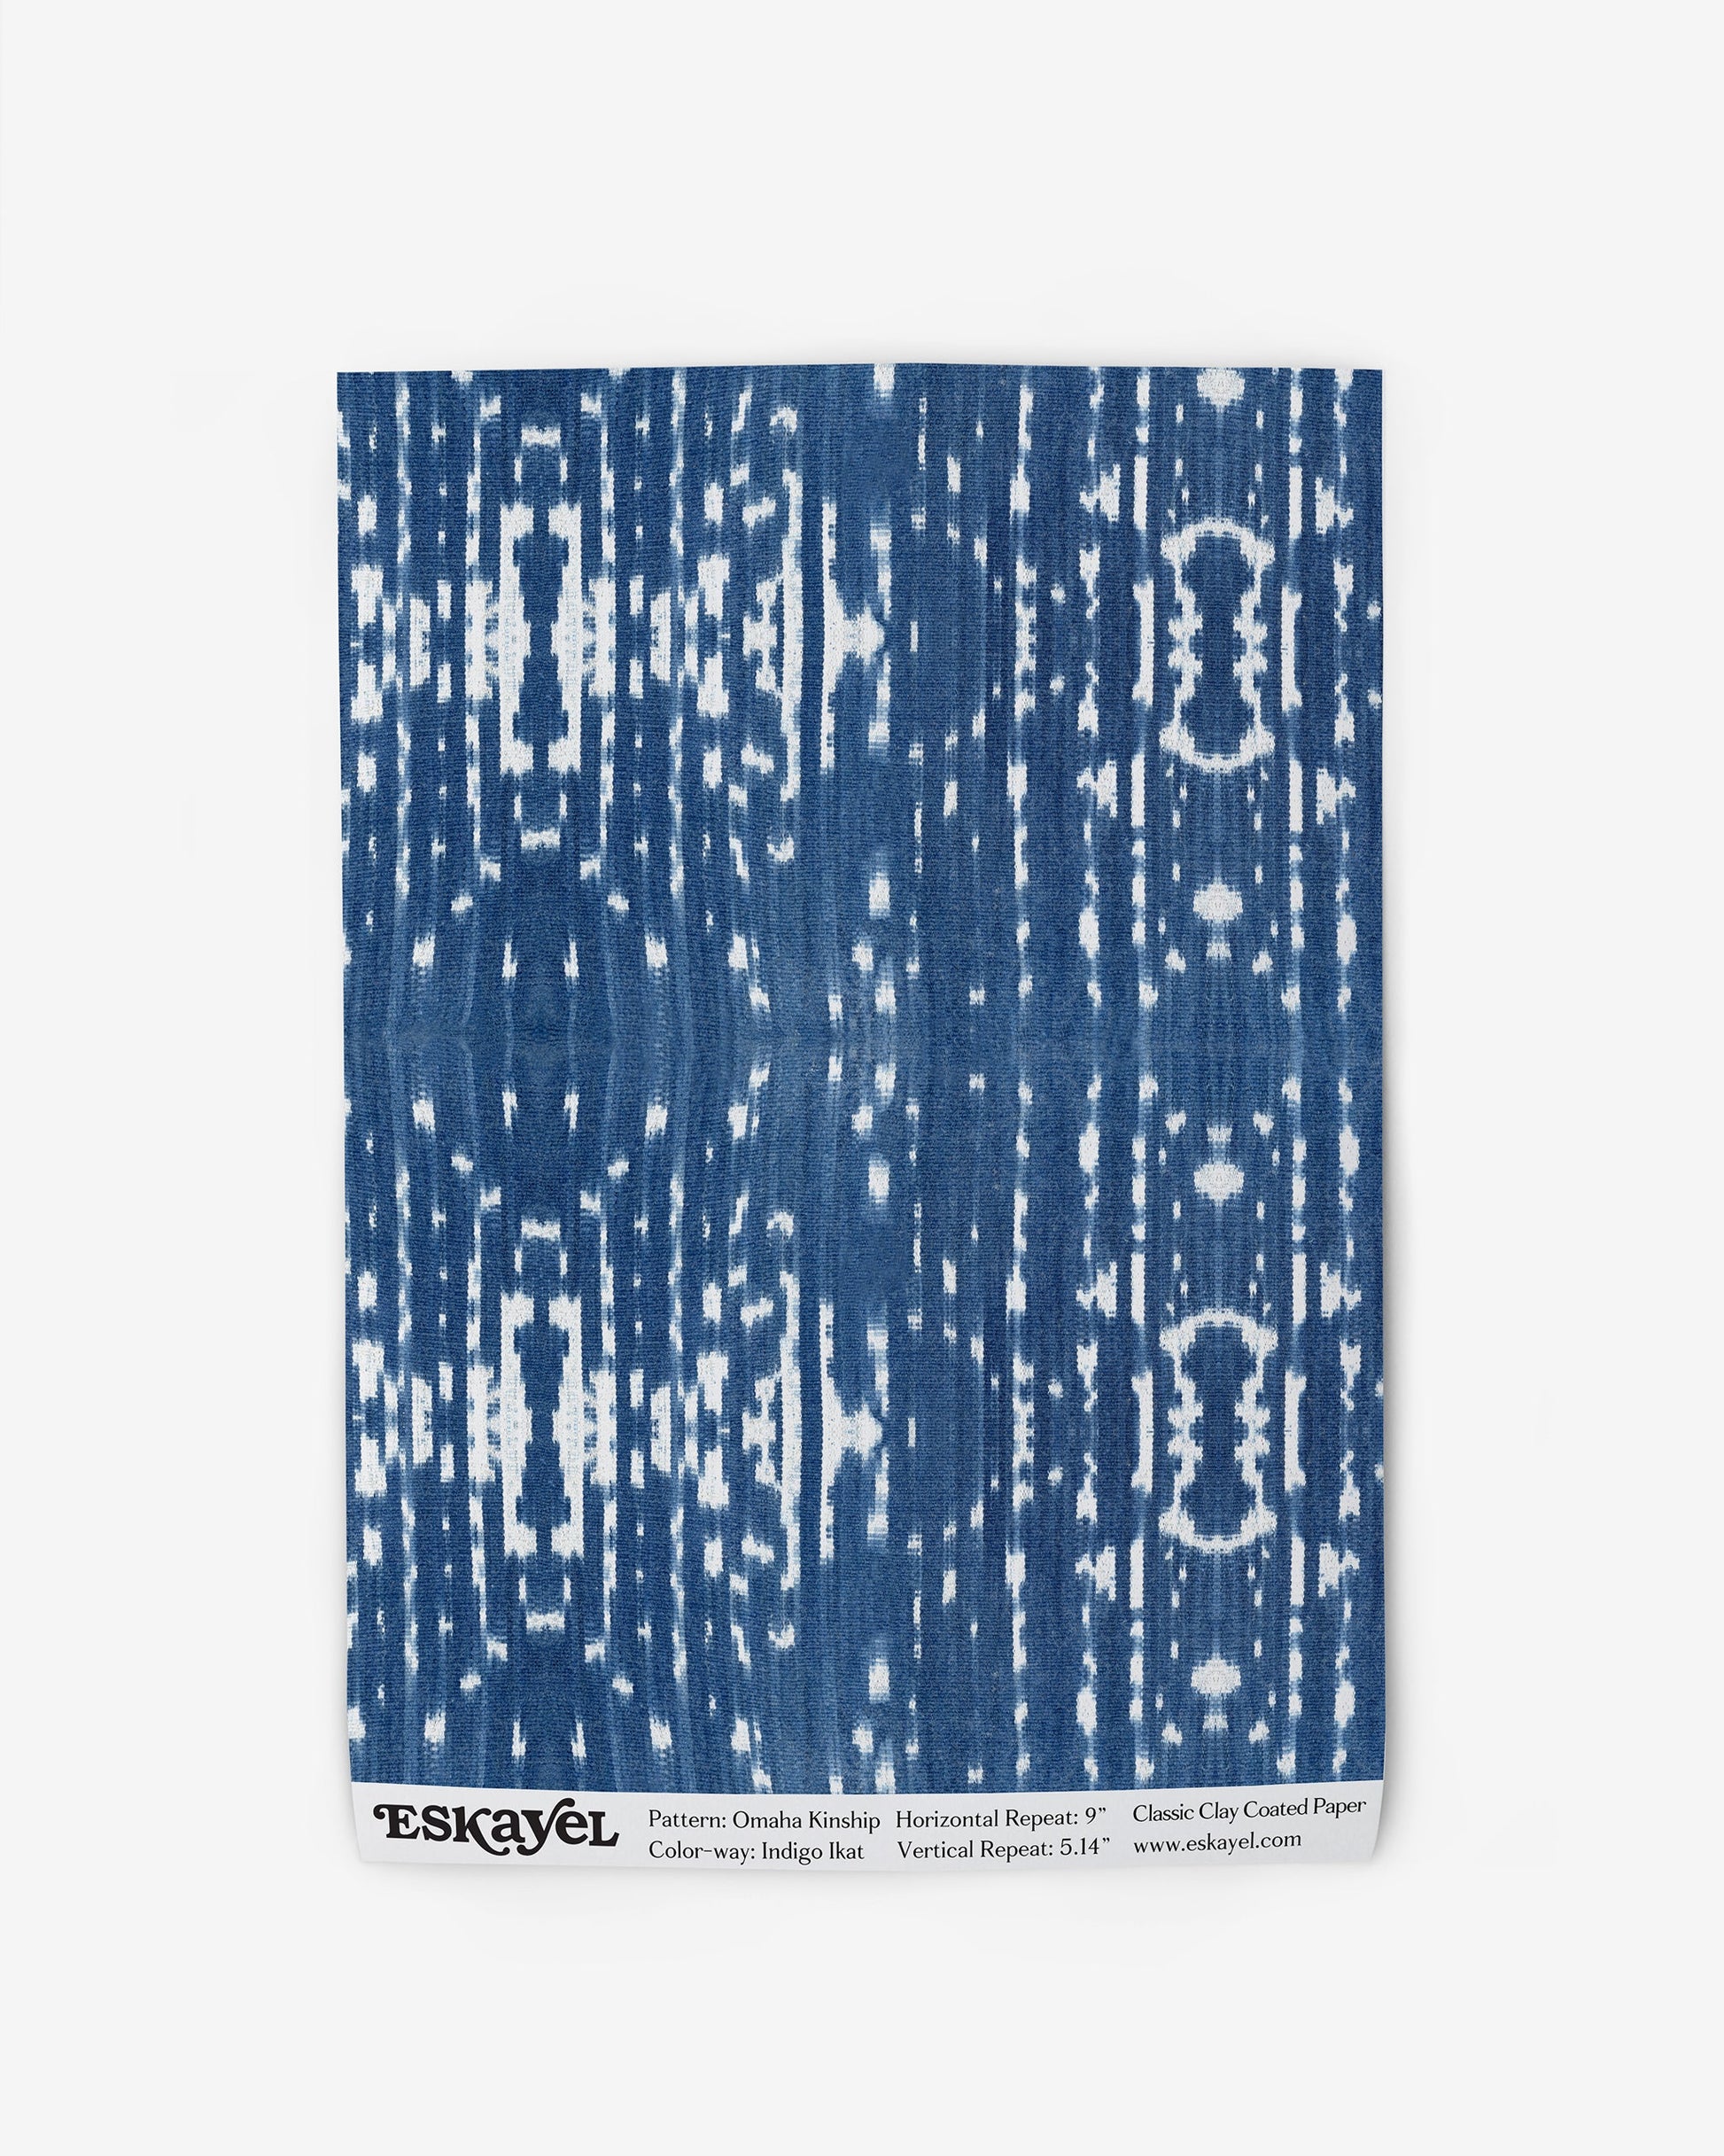 A blue and white Omaha Kinship Wallpaper Sample Indigo Ikat with an abstract pattern is available to order